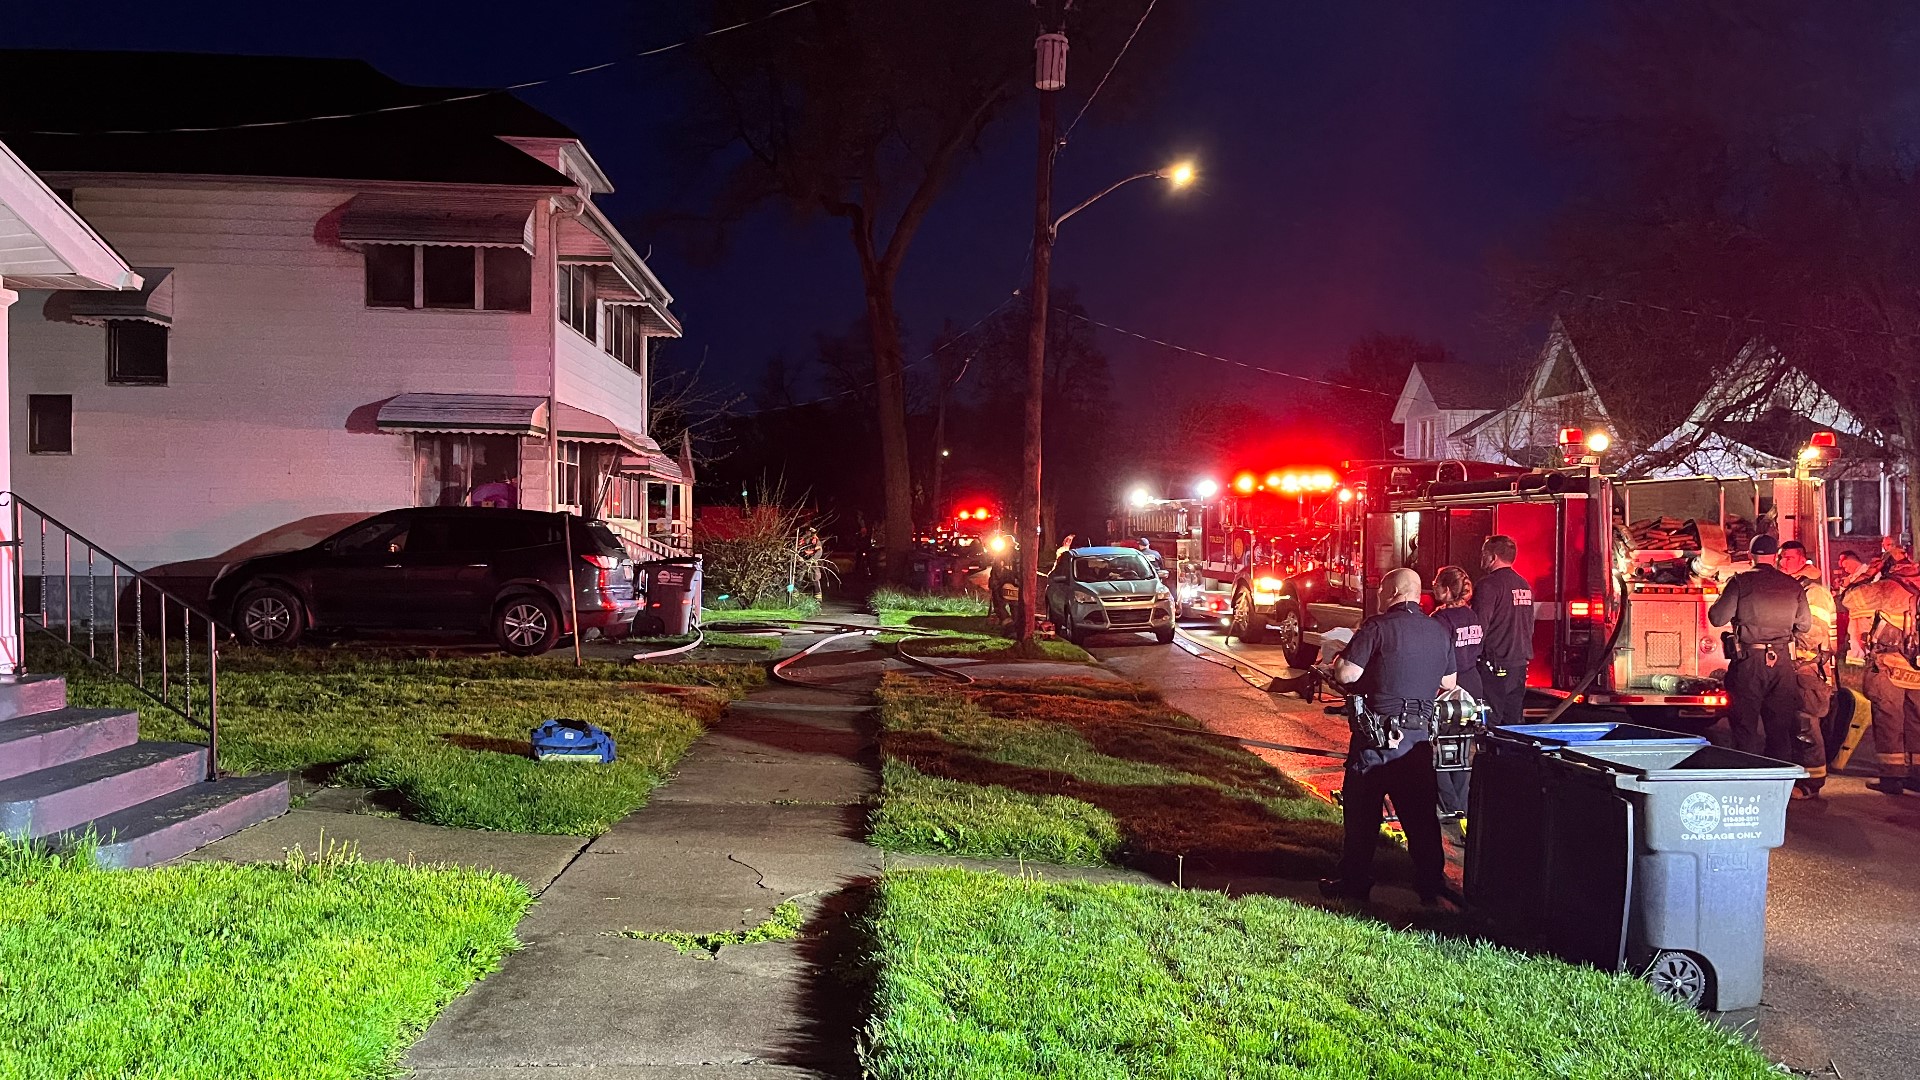 All seven occupants, a dog and a cat made it out of the duplex on Pomeroy Street without injury, according to a Toledo fire battalion chief at the scene.